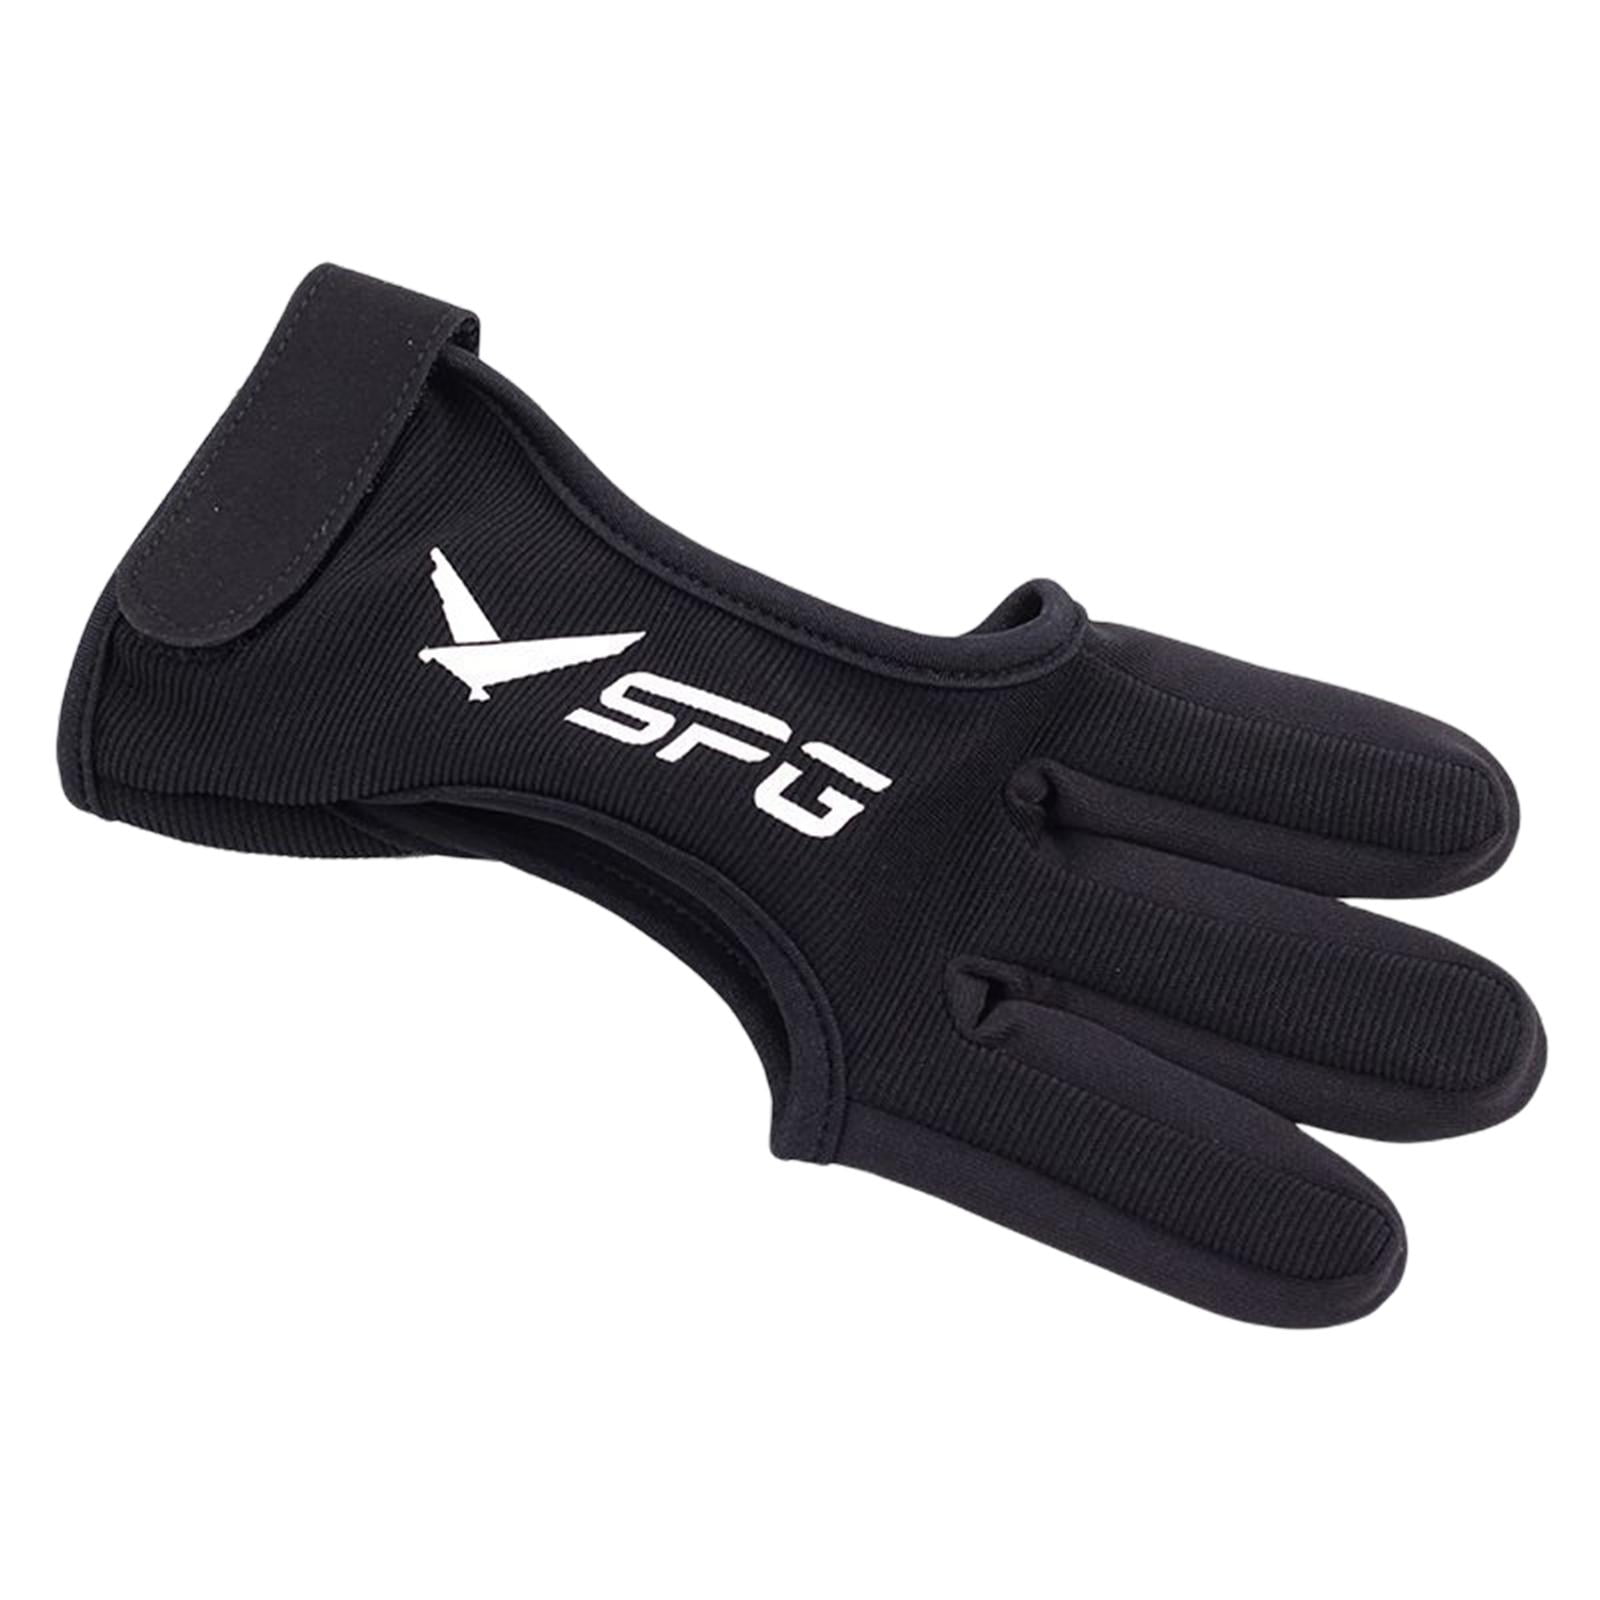 1Piece Archery Glove 3 Fingers Shooting Compound Recurve Bow Protector Glove 